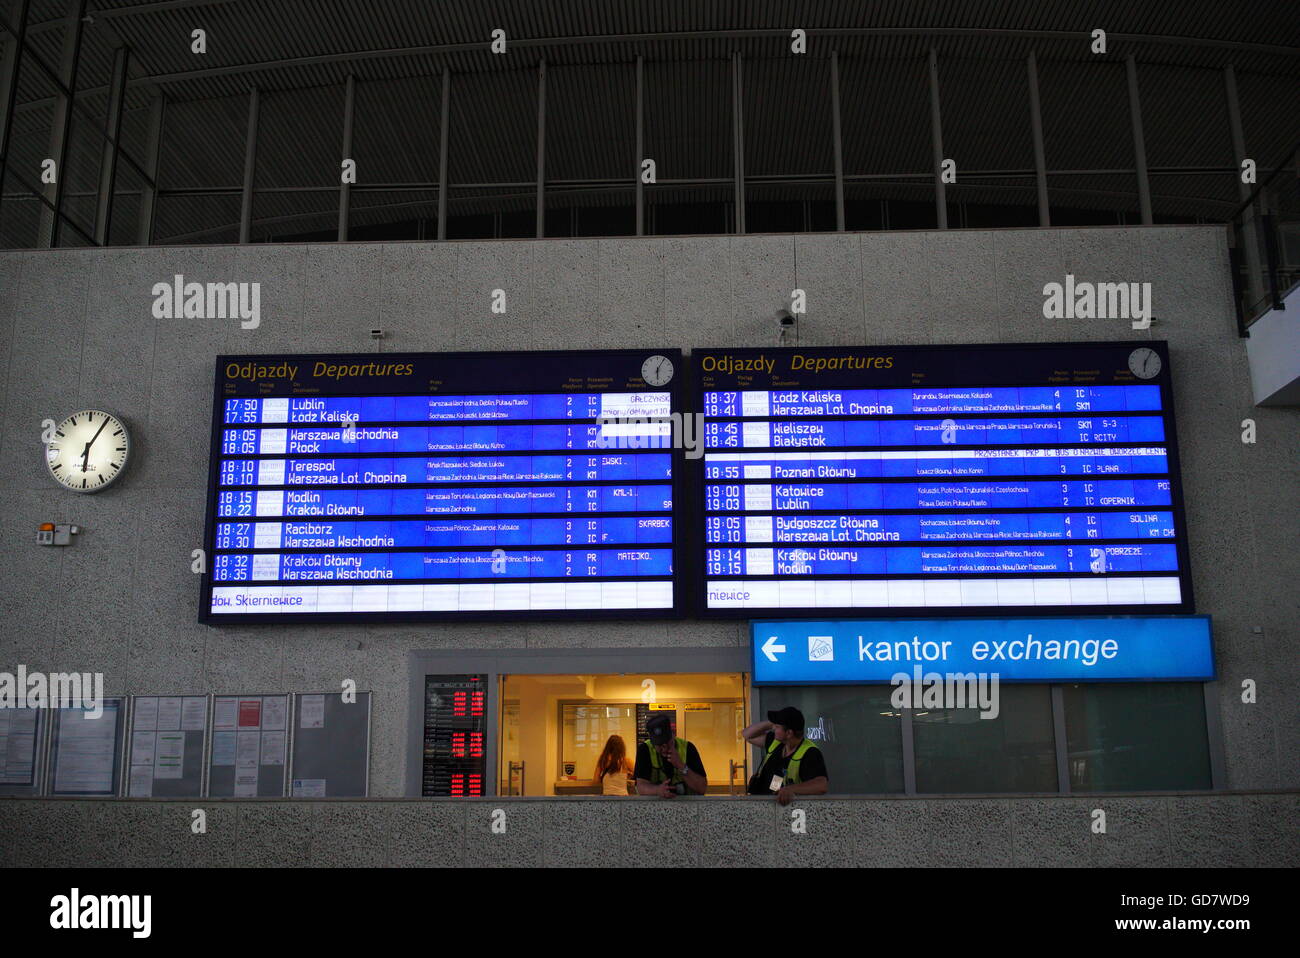 Electronic timetable at Warsaw Central Station, Poland Stock Photo